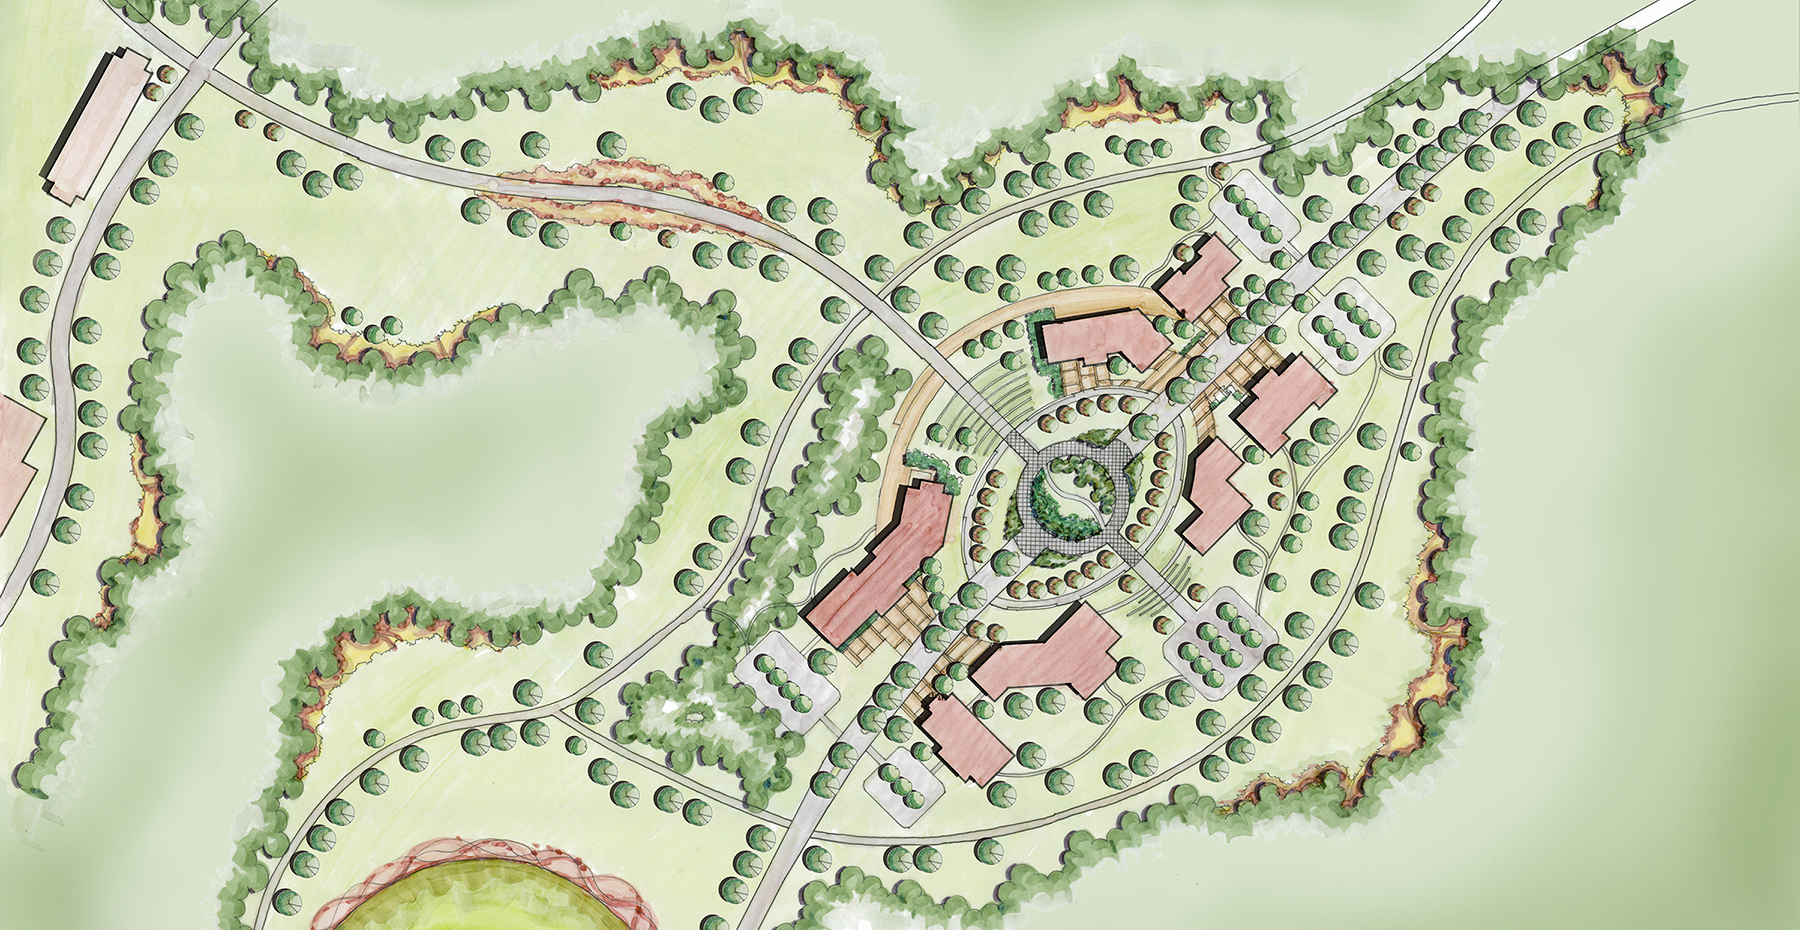 Design for a proposed research park